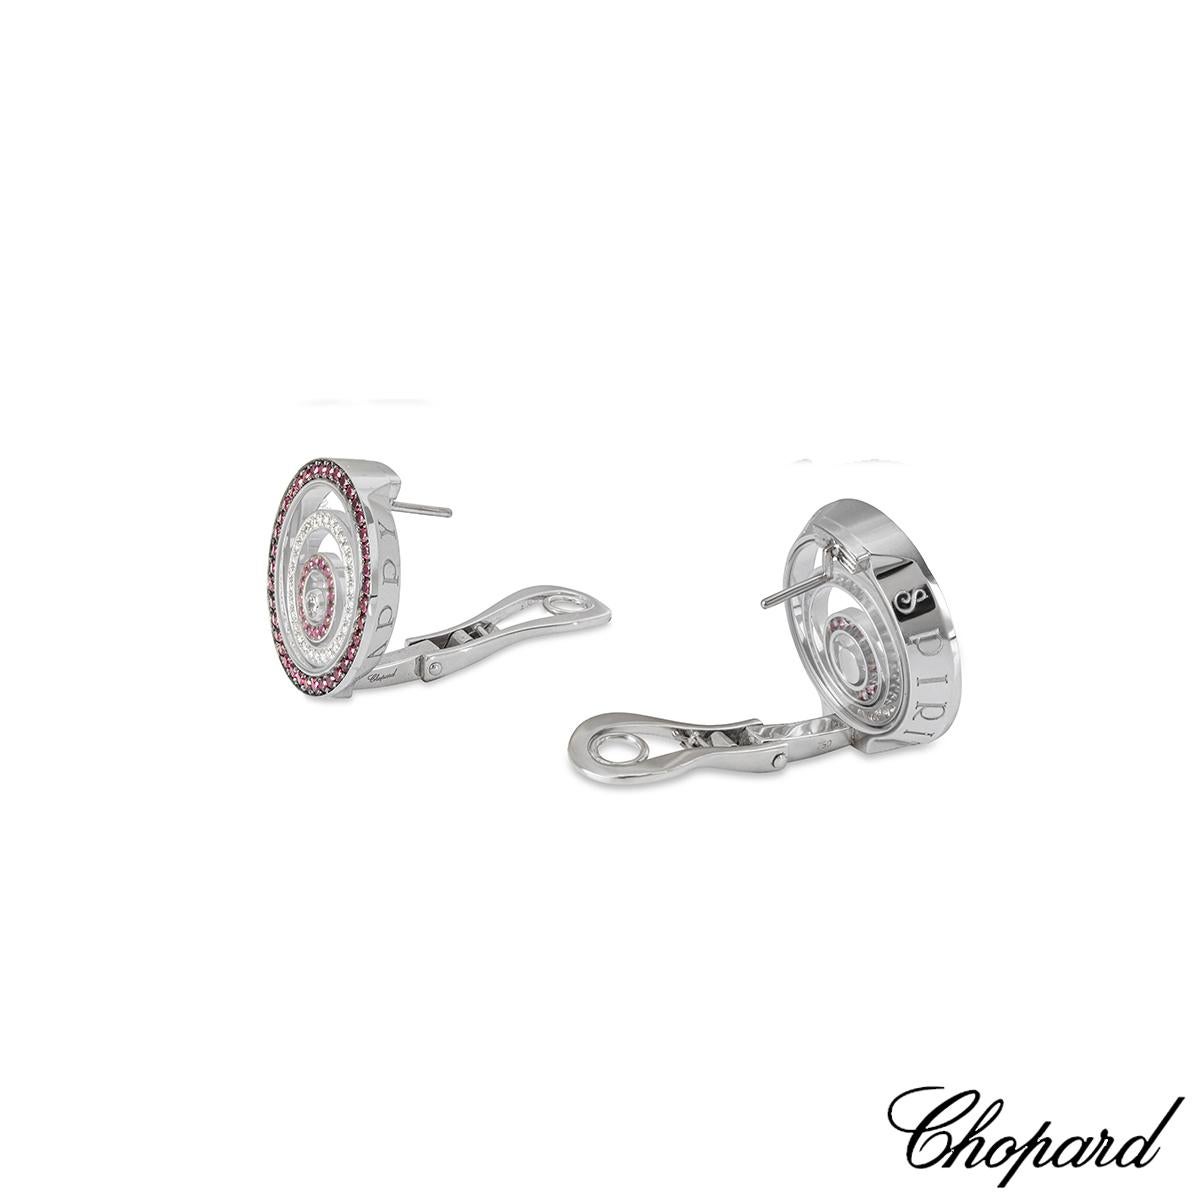 Chopard White Gold Ruby & Diamond Happy Spirit Earrings 84/5425-1002 In New Condition For Sale In London, GB